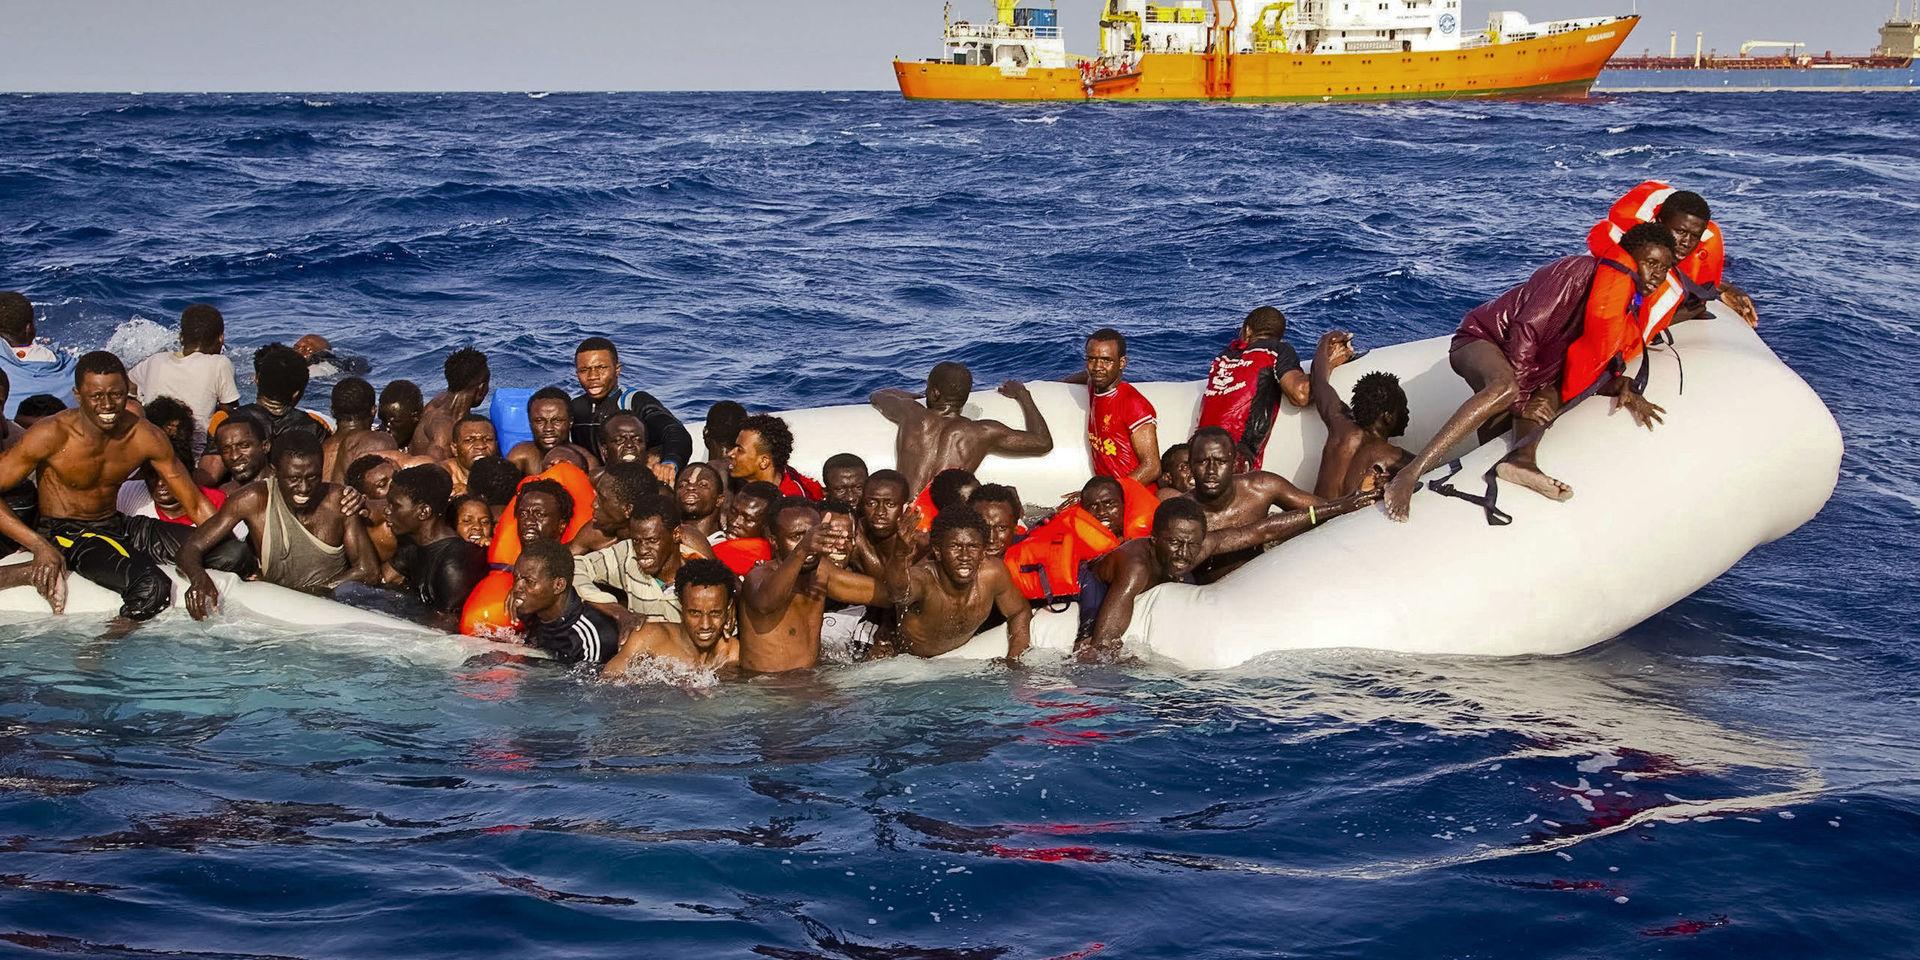 In this photo taken on Sunday, April 17, 2016 migrants ask for help from a dinghy boat as they are approached by the SOS Mediterranee&apos;s ship Aquarius, background, off the coast of the Italian island of Lampedusa. The European Union&apos;s border agency says the number of migrants crossing the Mediterranean Sea to Italy more than doubled last month. Frontex said in a statement on Monday that almost 9,600 migrants attempted the crossing, one of the most perilous sea voyages for people seeking sanctuary or jobs in Europe. (Patrick Bar/SOS Mediterranee via AP)